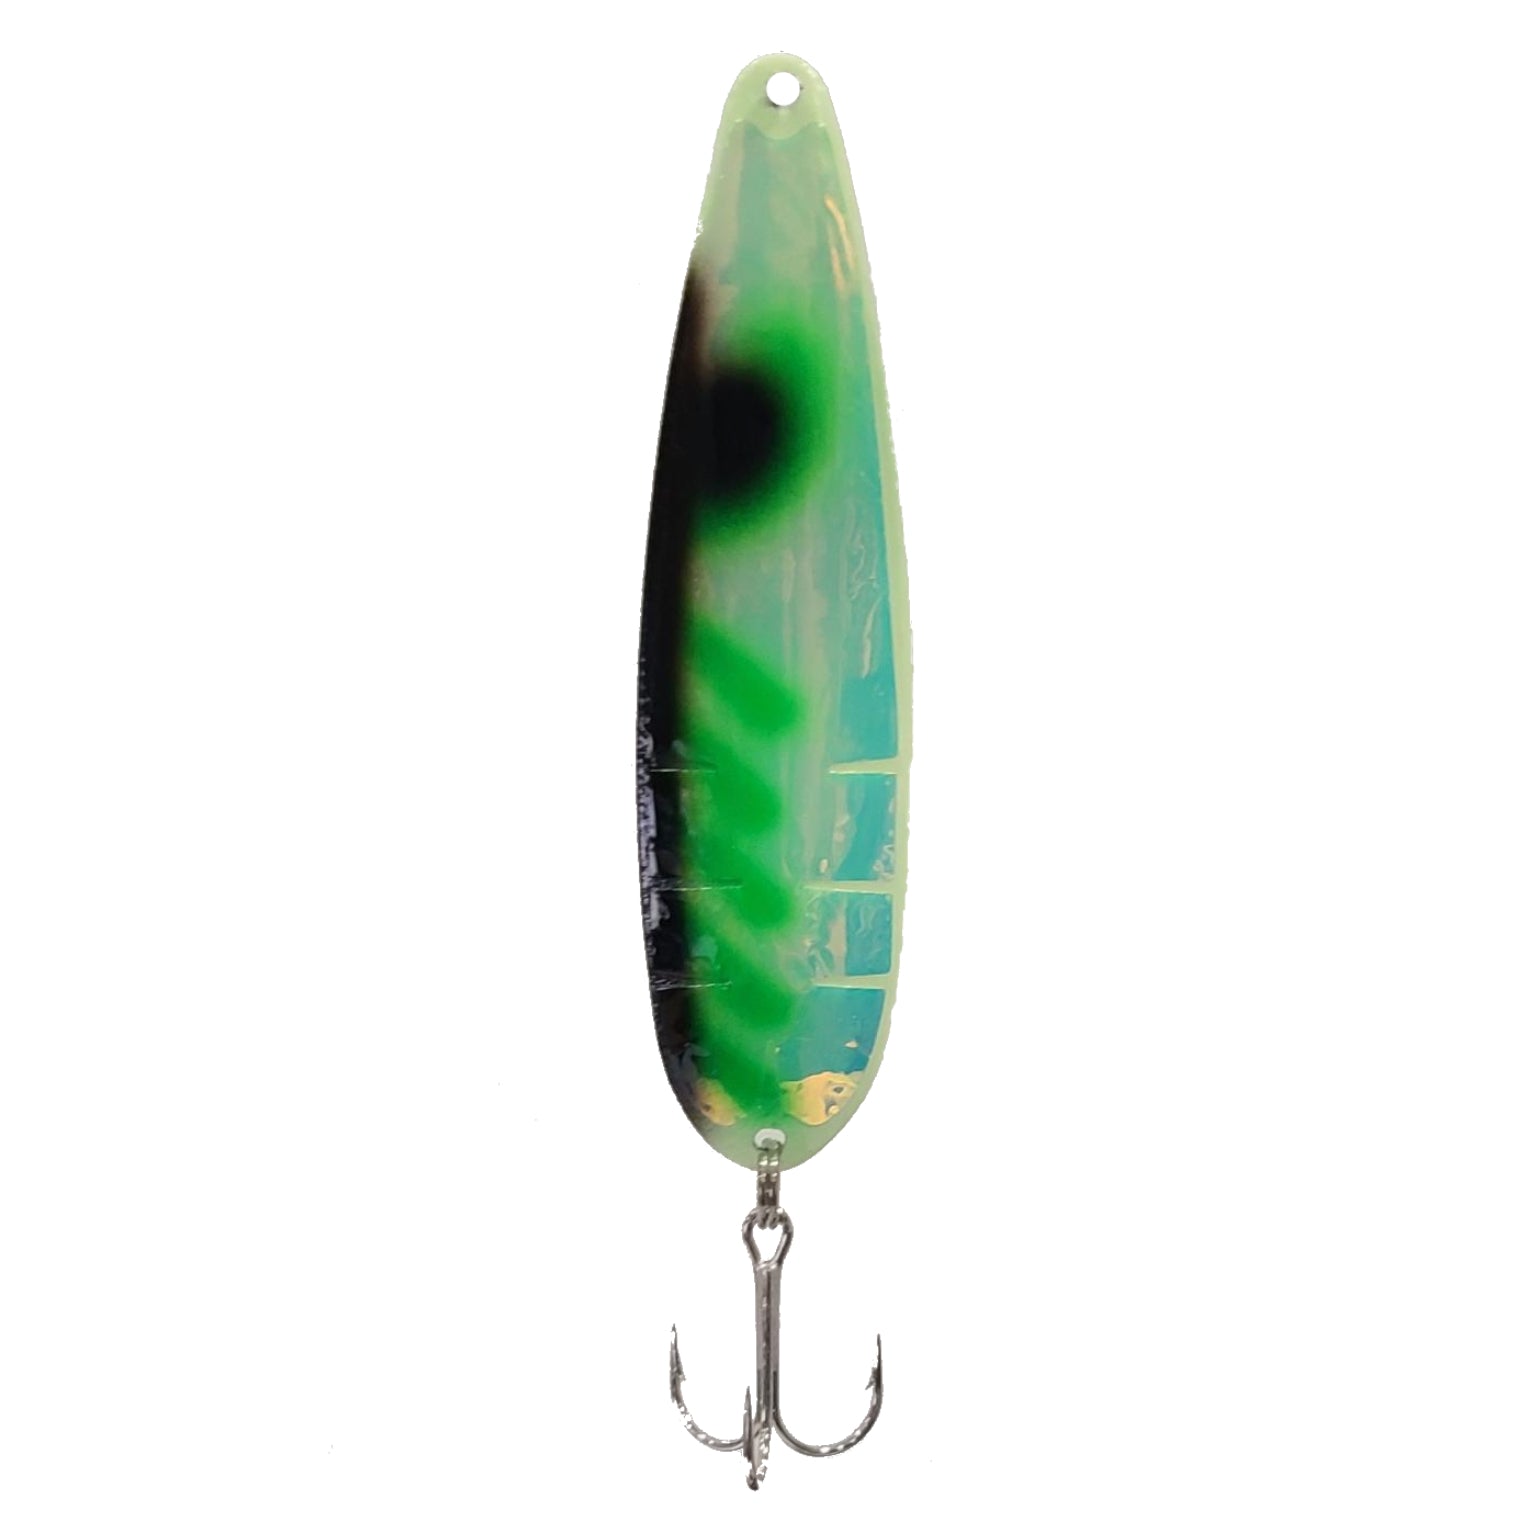 WINOMO Soft Fishing Lure with Fishing Hook Artificial Bait Crab (Green)